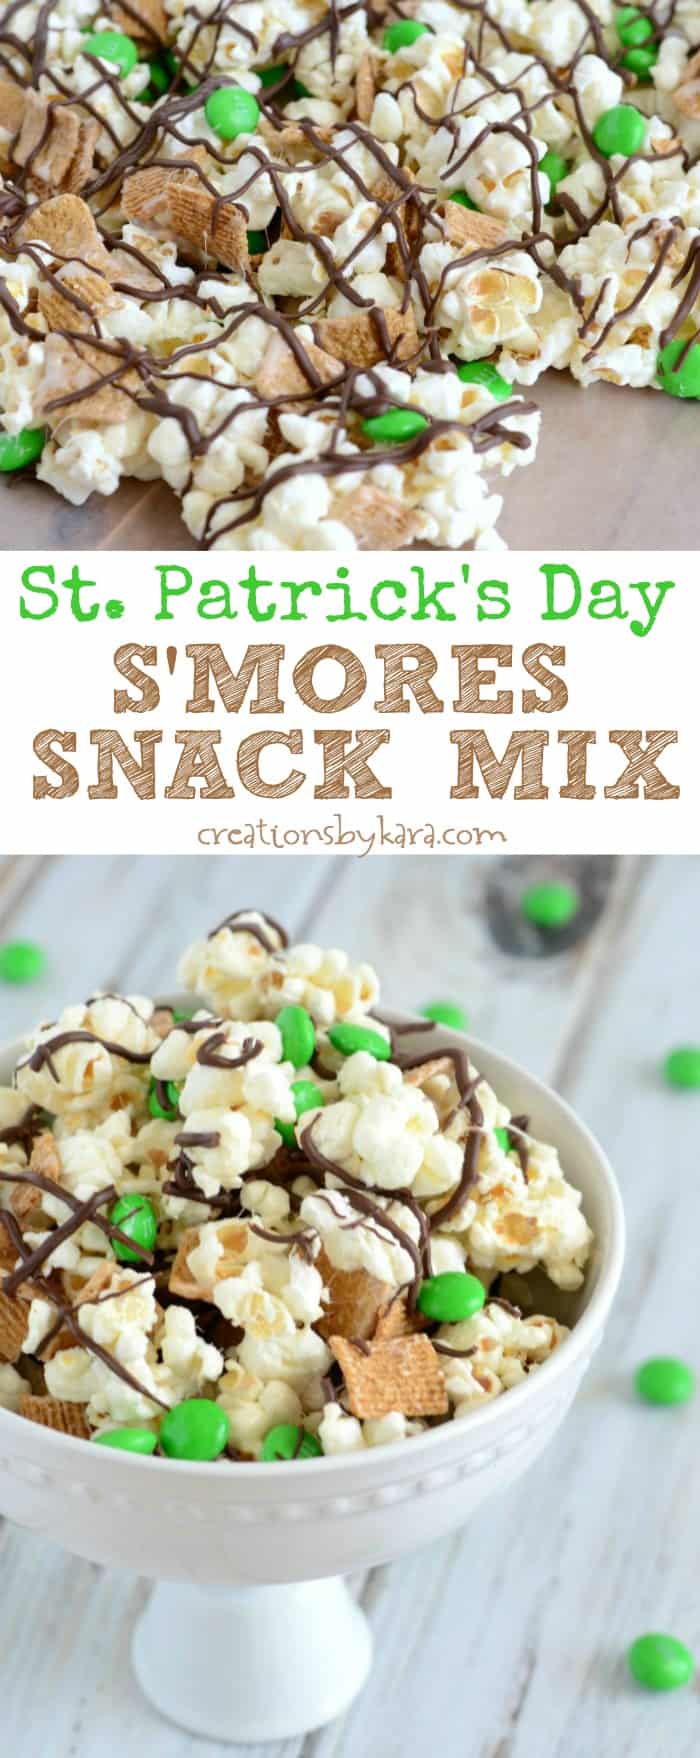 St. Patrick's Day S'more Snack Mix - Creations by Kara